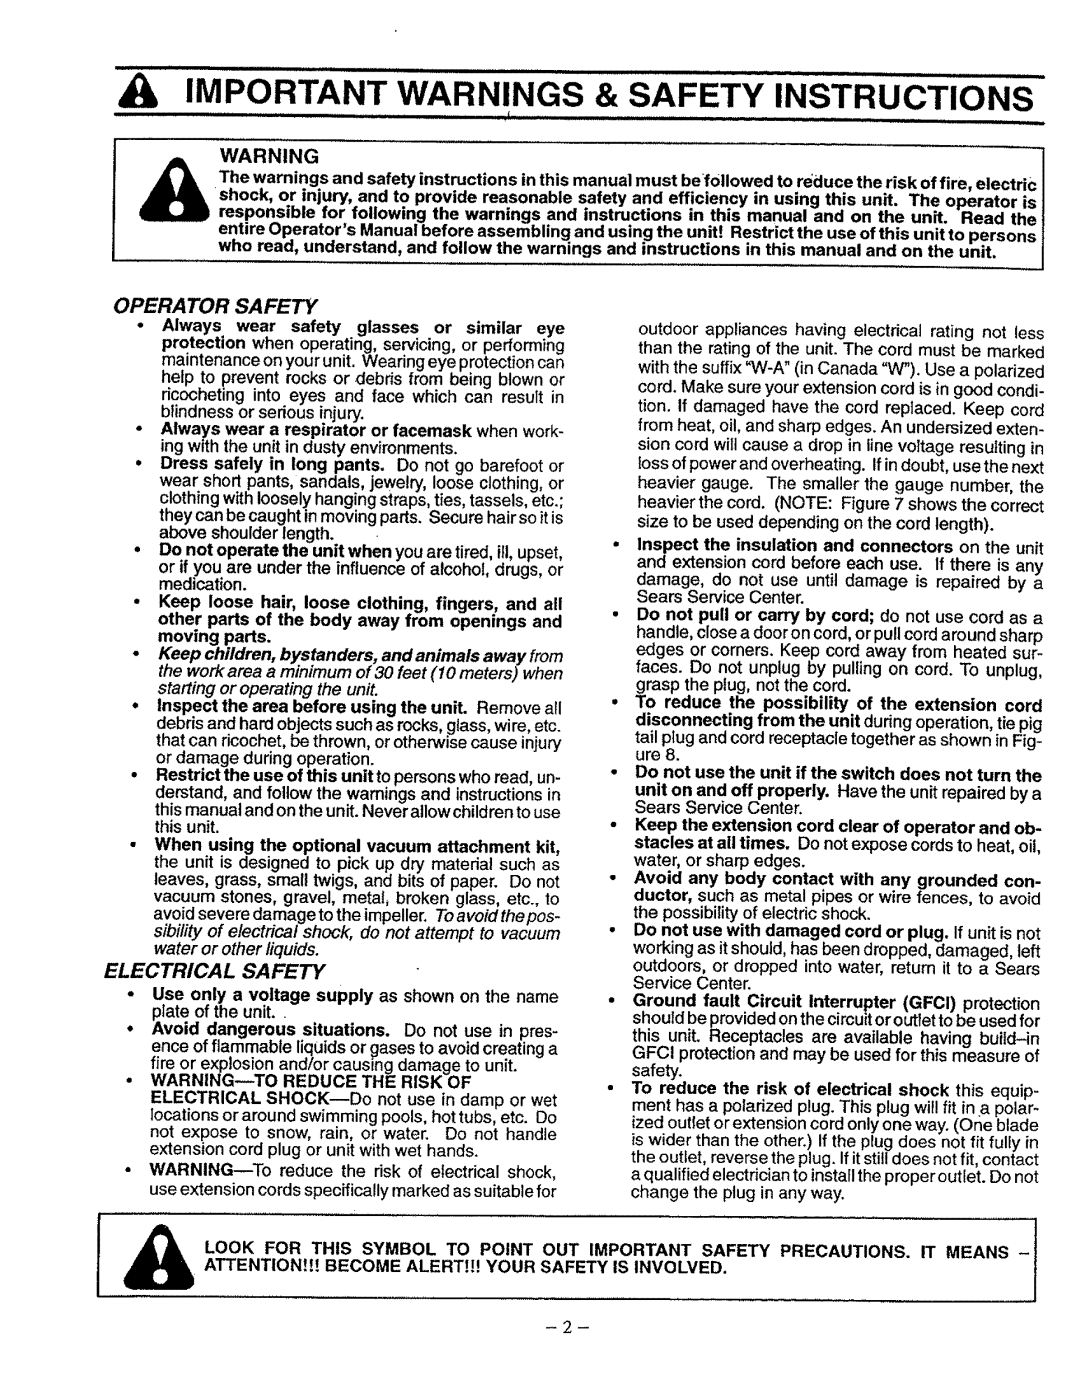 Univex 358.798380 manual Important Warnings & Safety Instructions, Operator Safety, Electrical Safety 